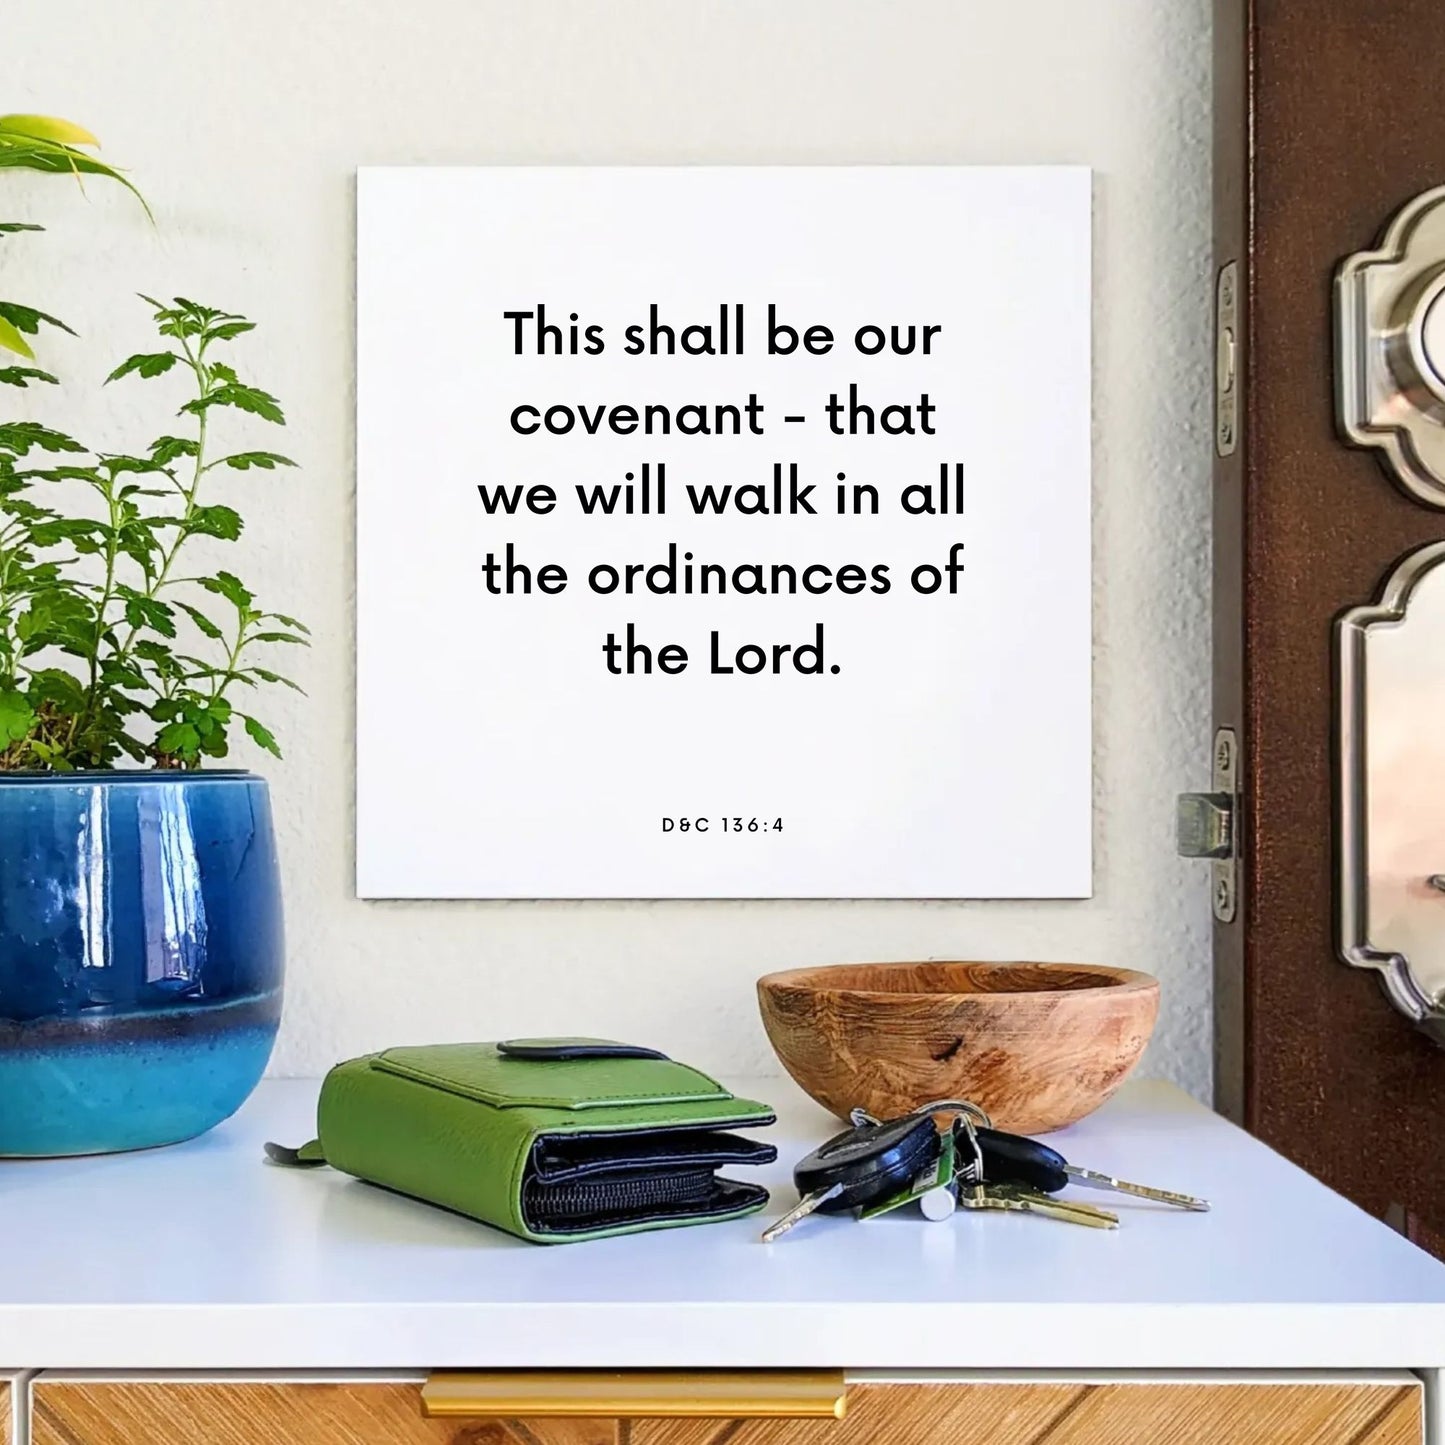 Entryway mouting of the scripture tile for D&C 136:4 - "We will walk in all the ordinances of the Lord"